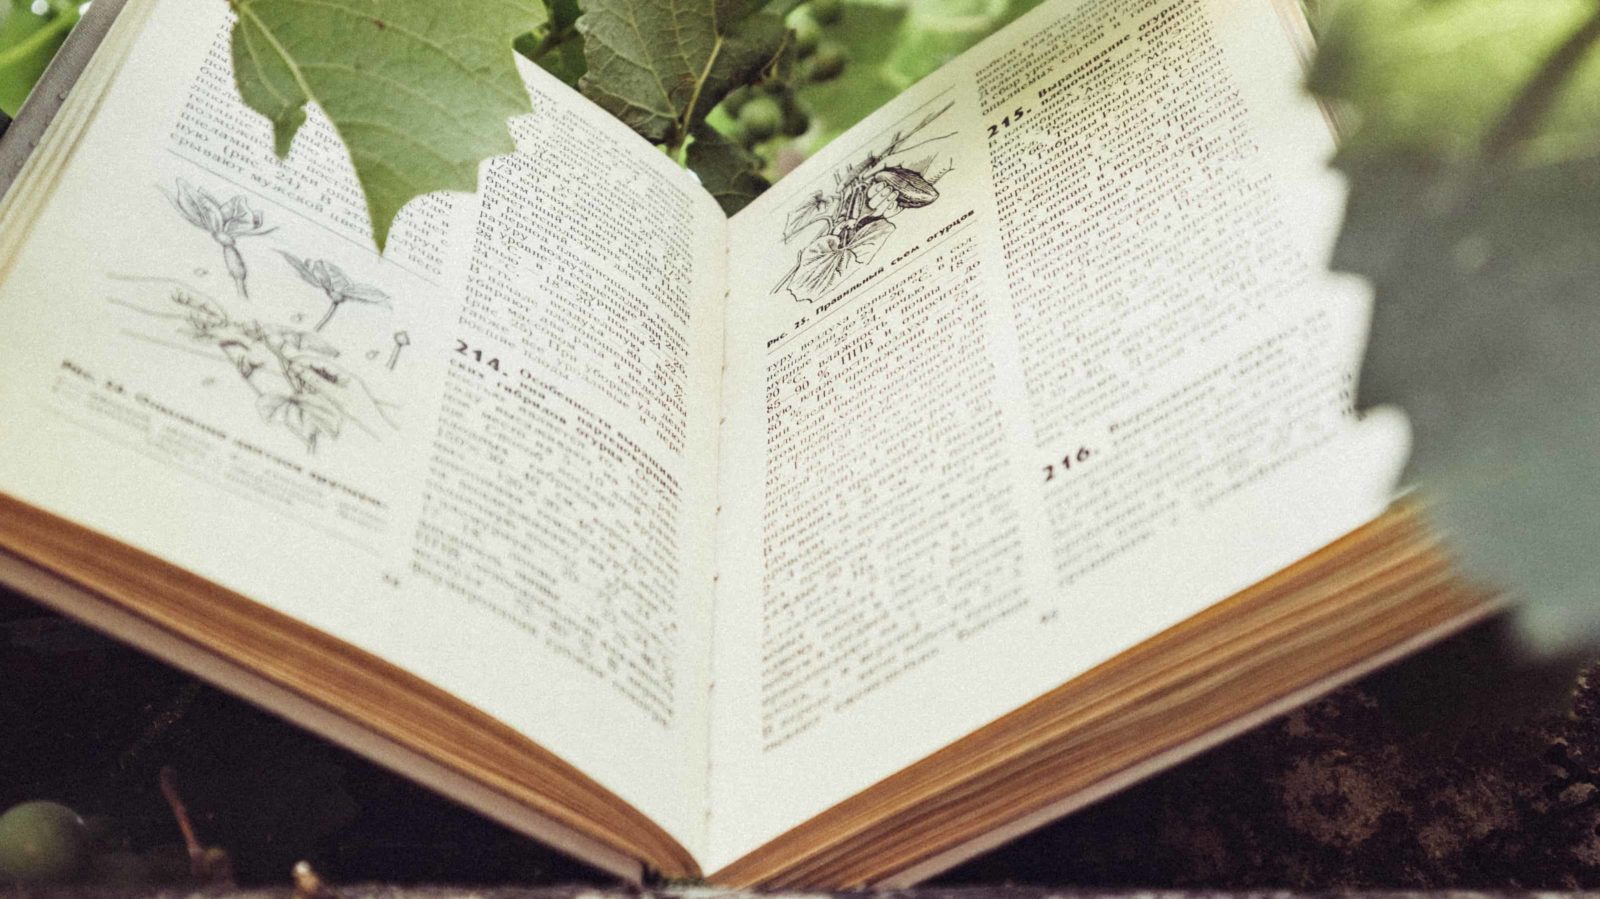 A botanical book lies open surrounded by with leaves. Public domain courtesy photo.